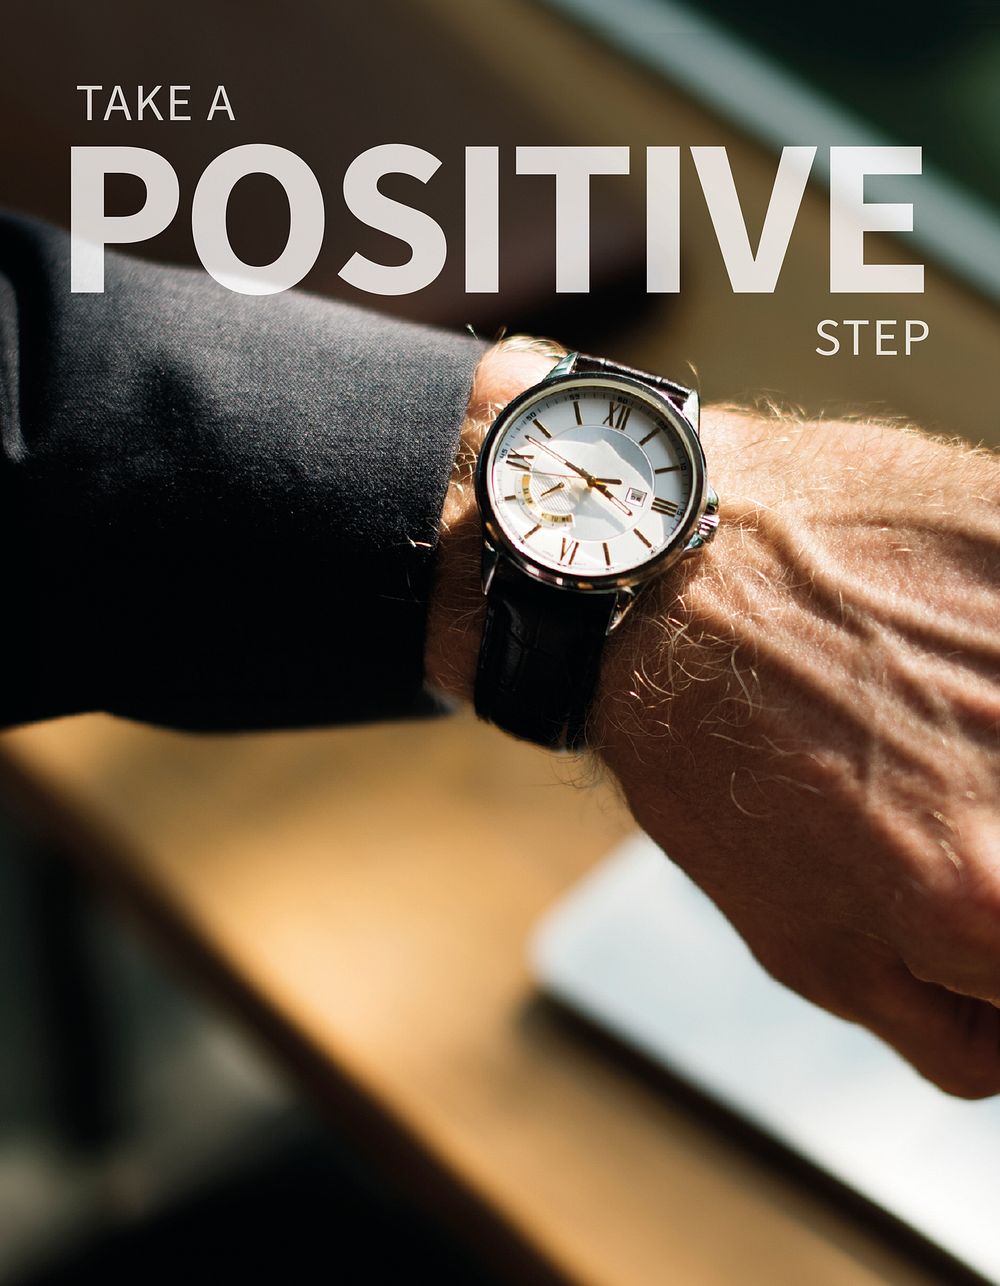 Positive step insurance template psd for business liability ad poster